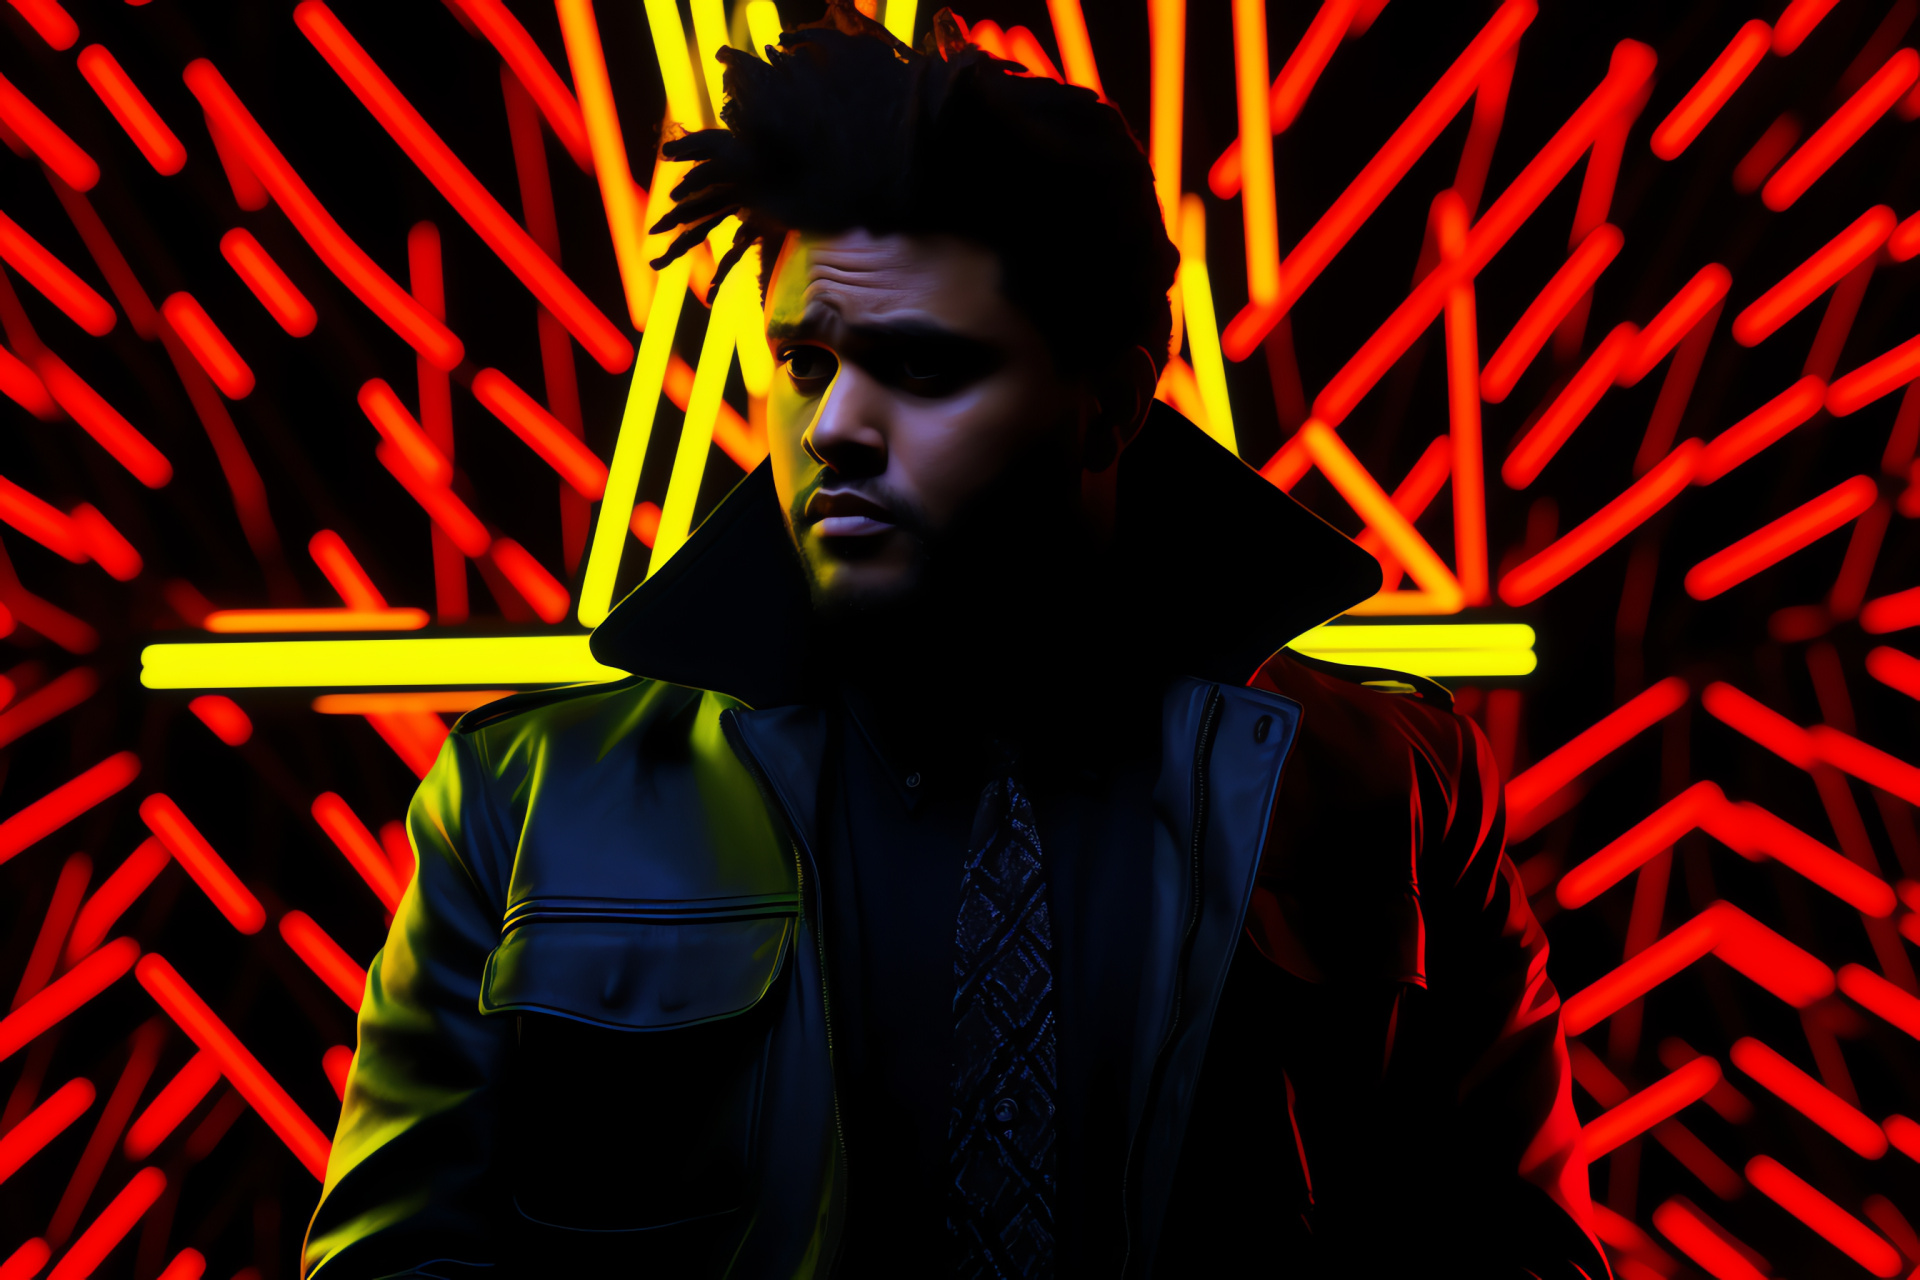 Iconic The Weeknd, Signature look, Artist's hair, Mysterious figure, Performer's stare, HD Desktop Wallpaper